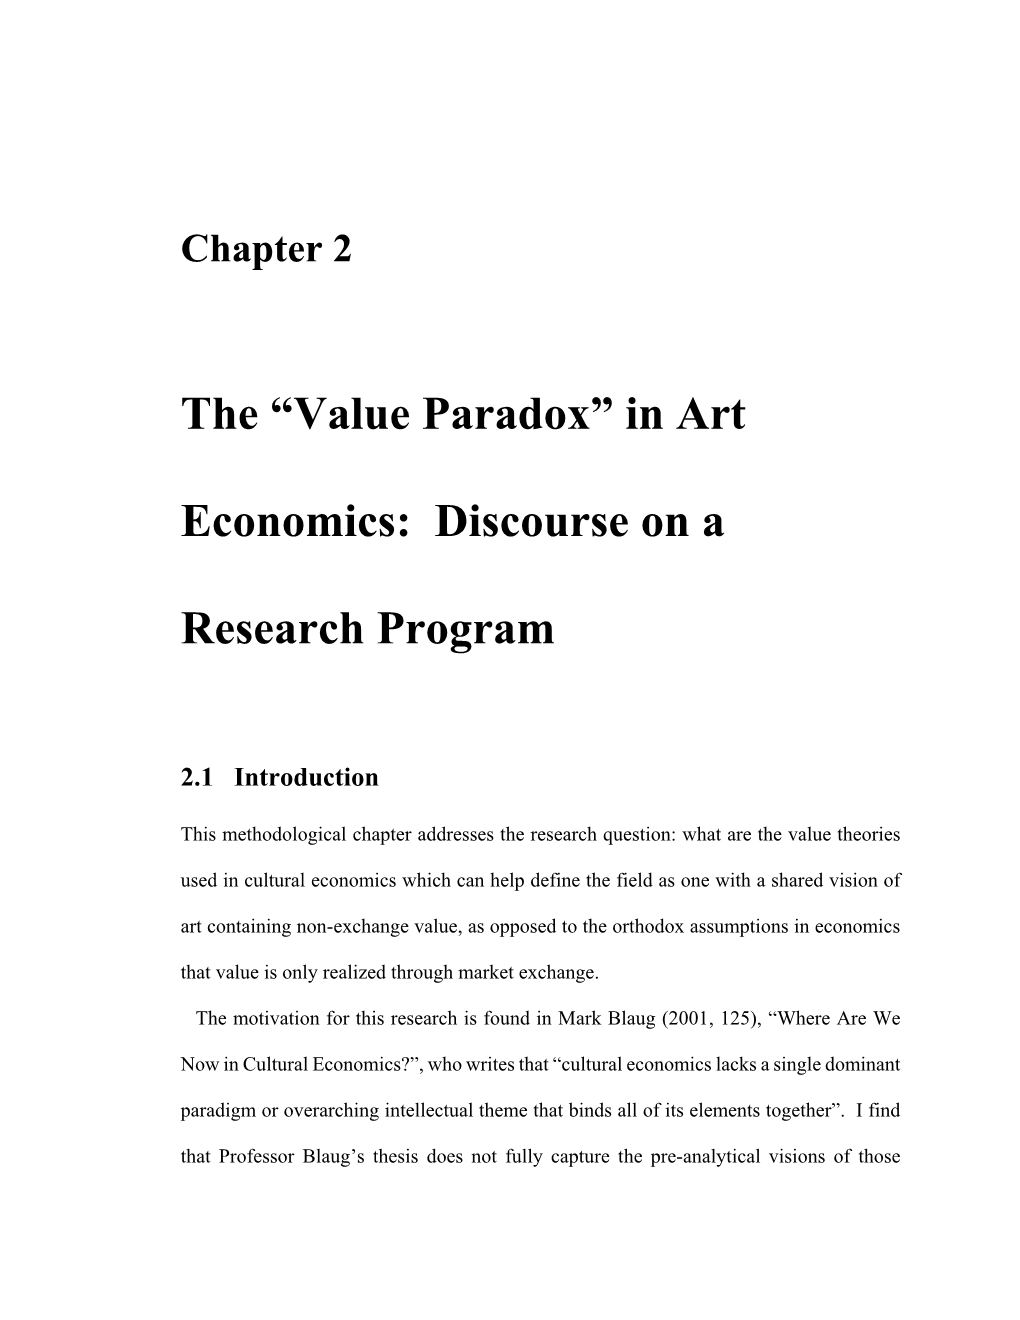 The “Value Paradox” in Art Economics: Discourse on a Research Program